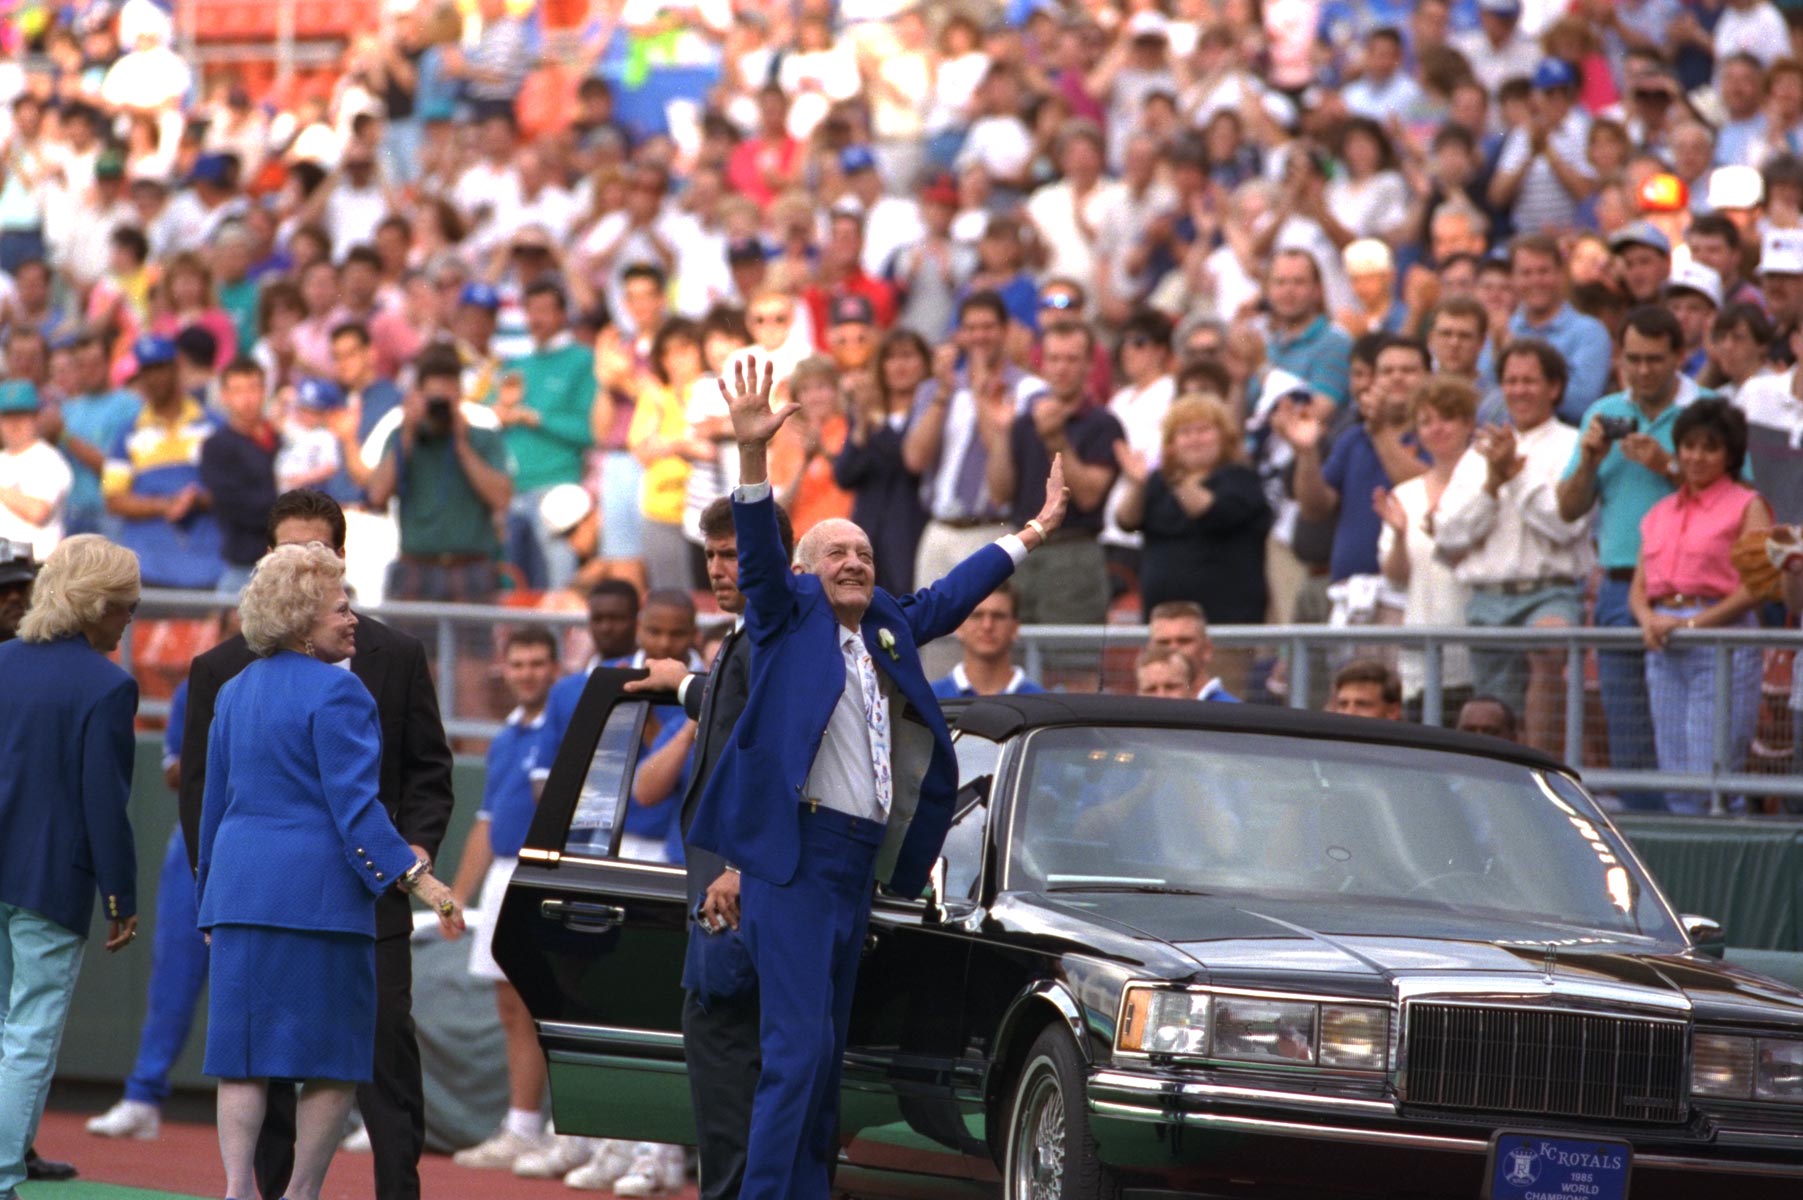 At Mr. Kauffman's last public appearance, he greets a crowd wearing a Royal blue suit.